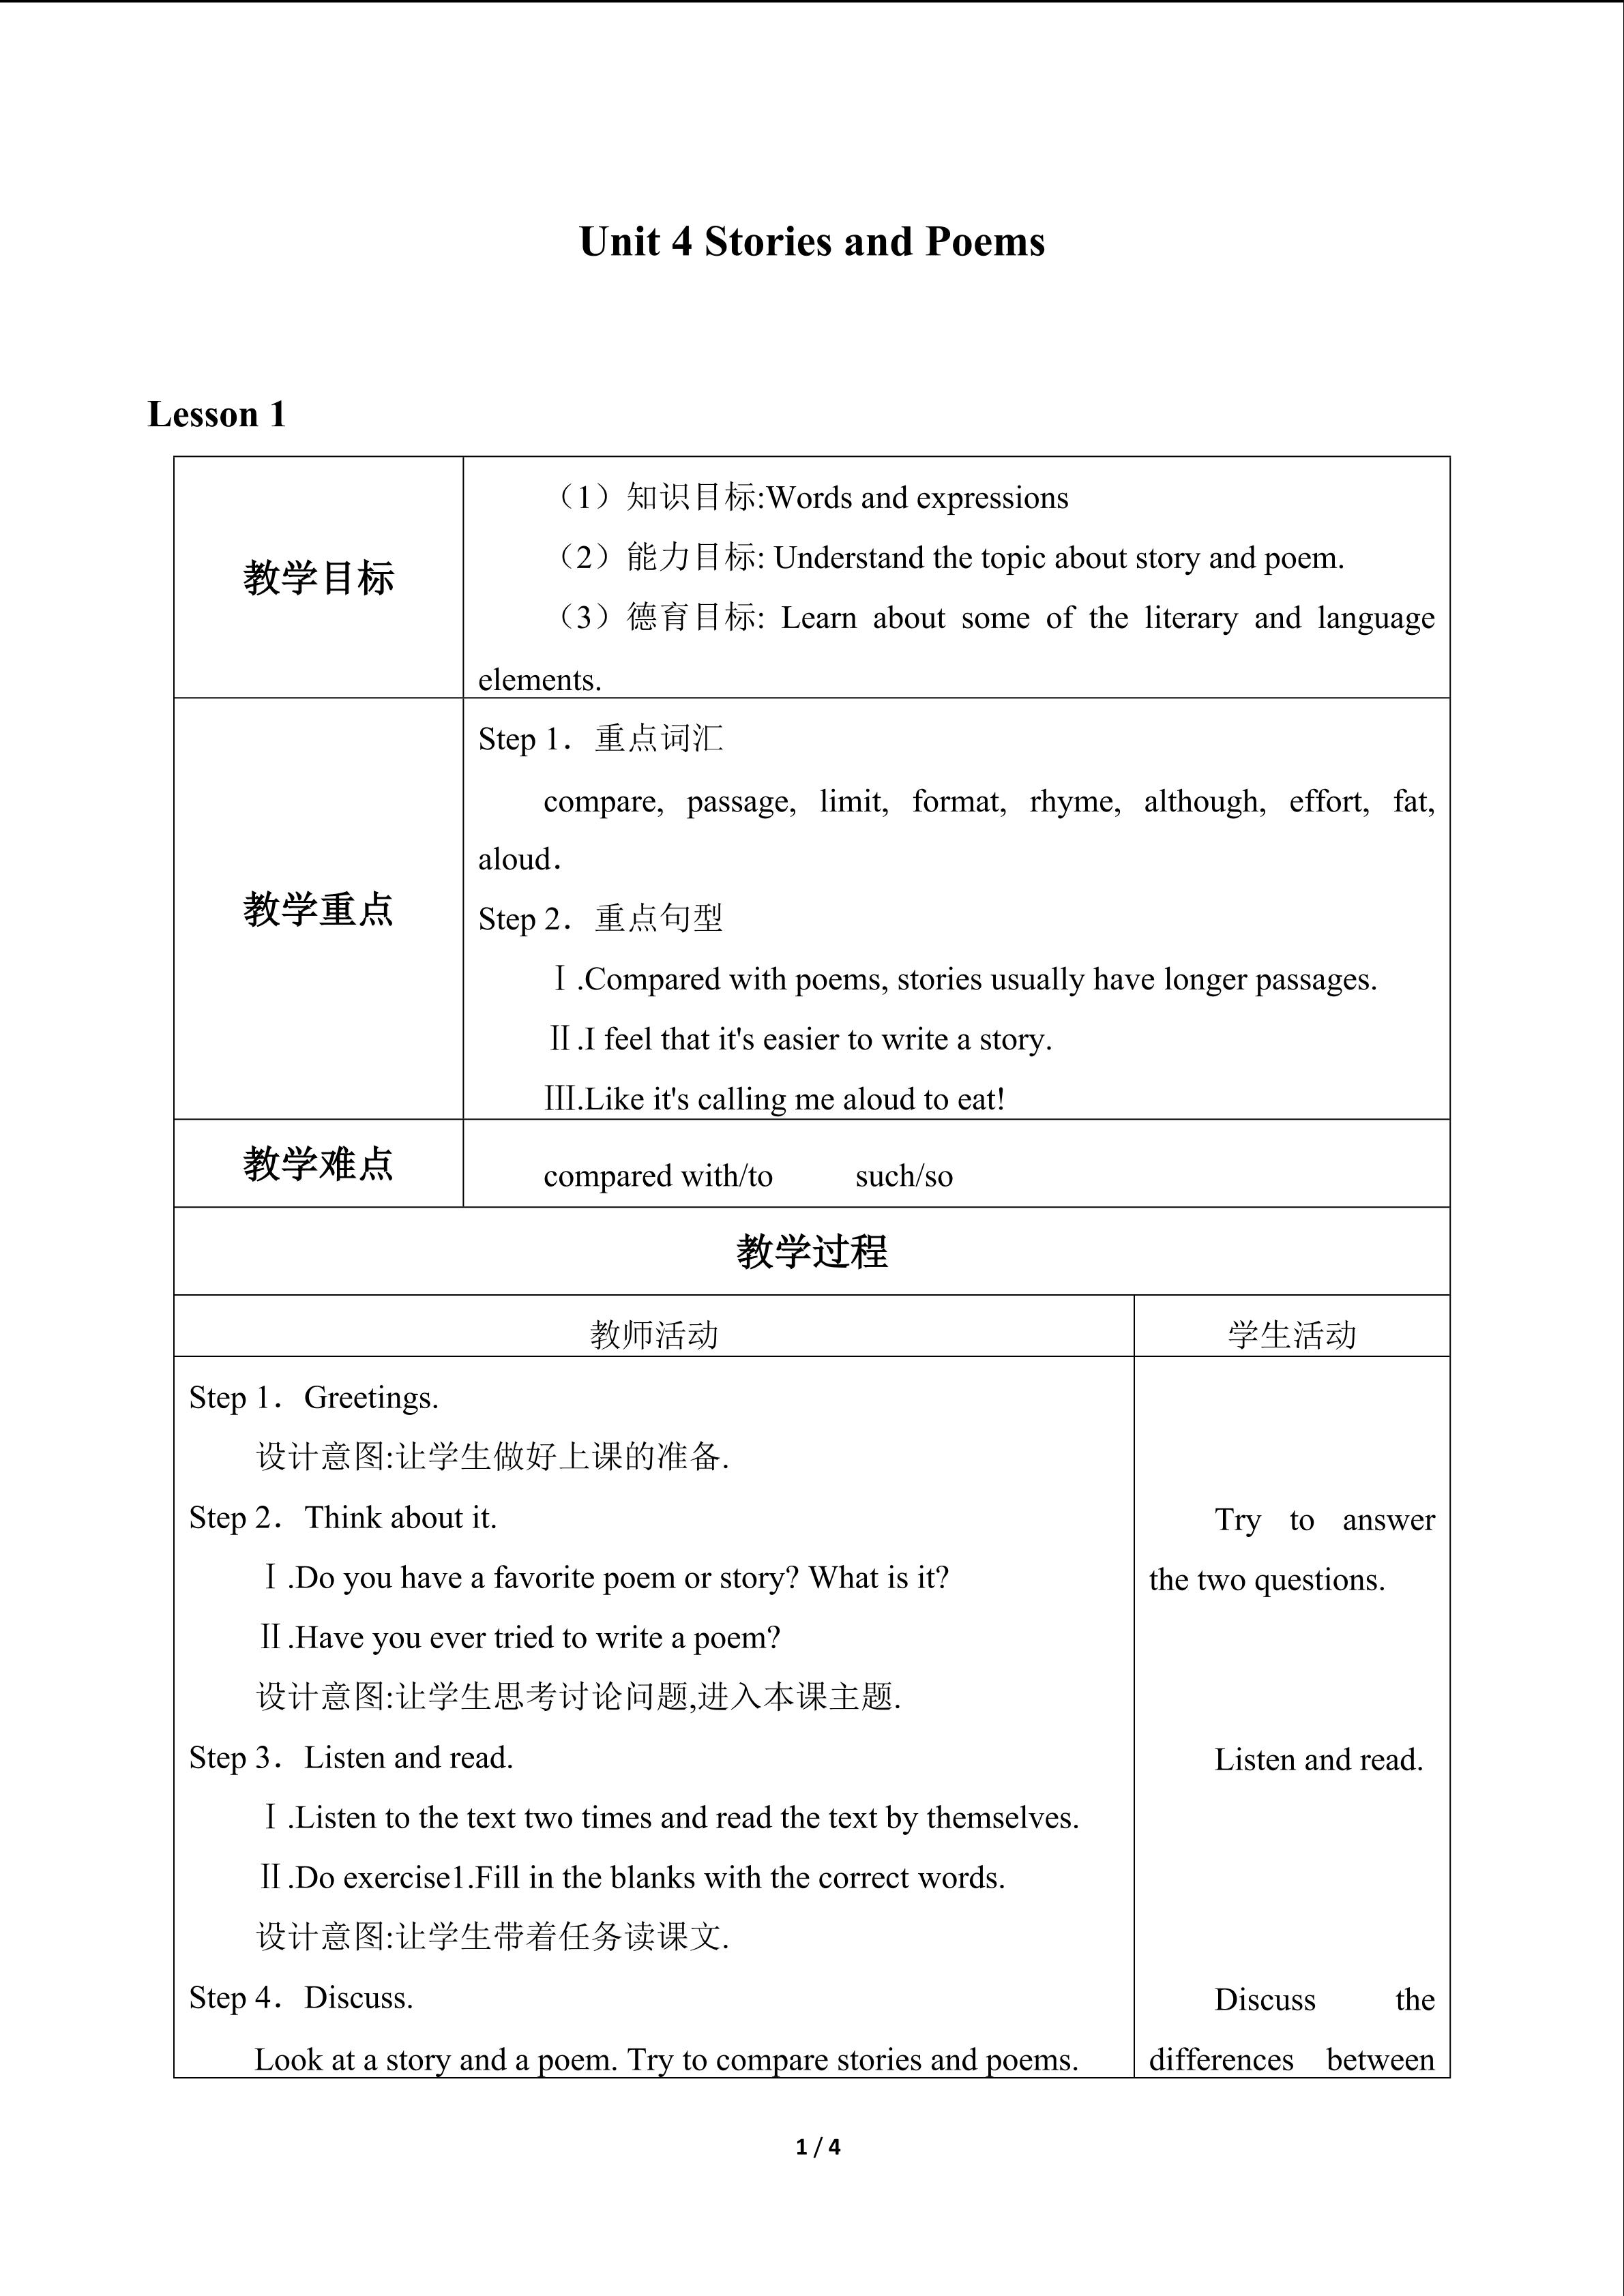 Unit 4 Stories and Poems_教案1